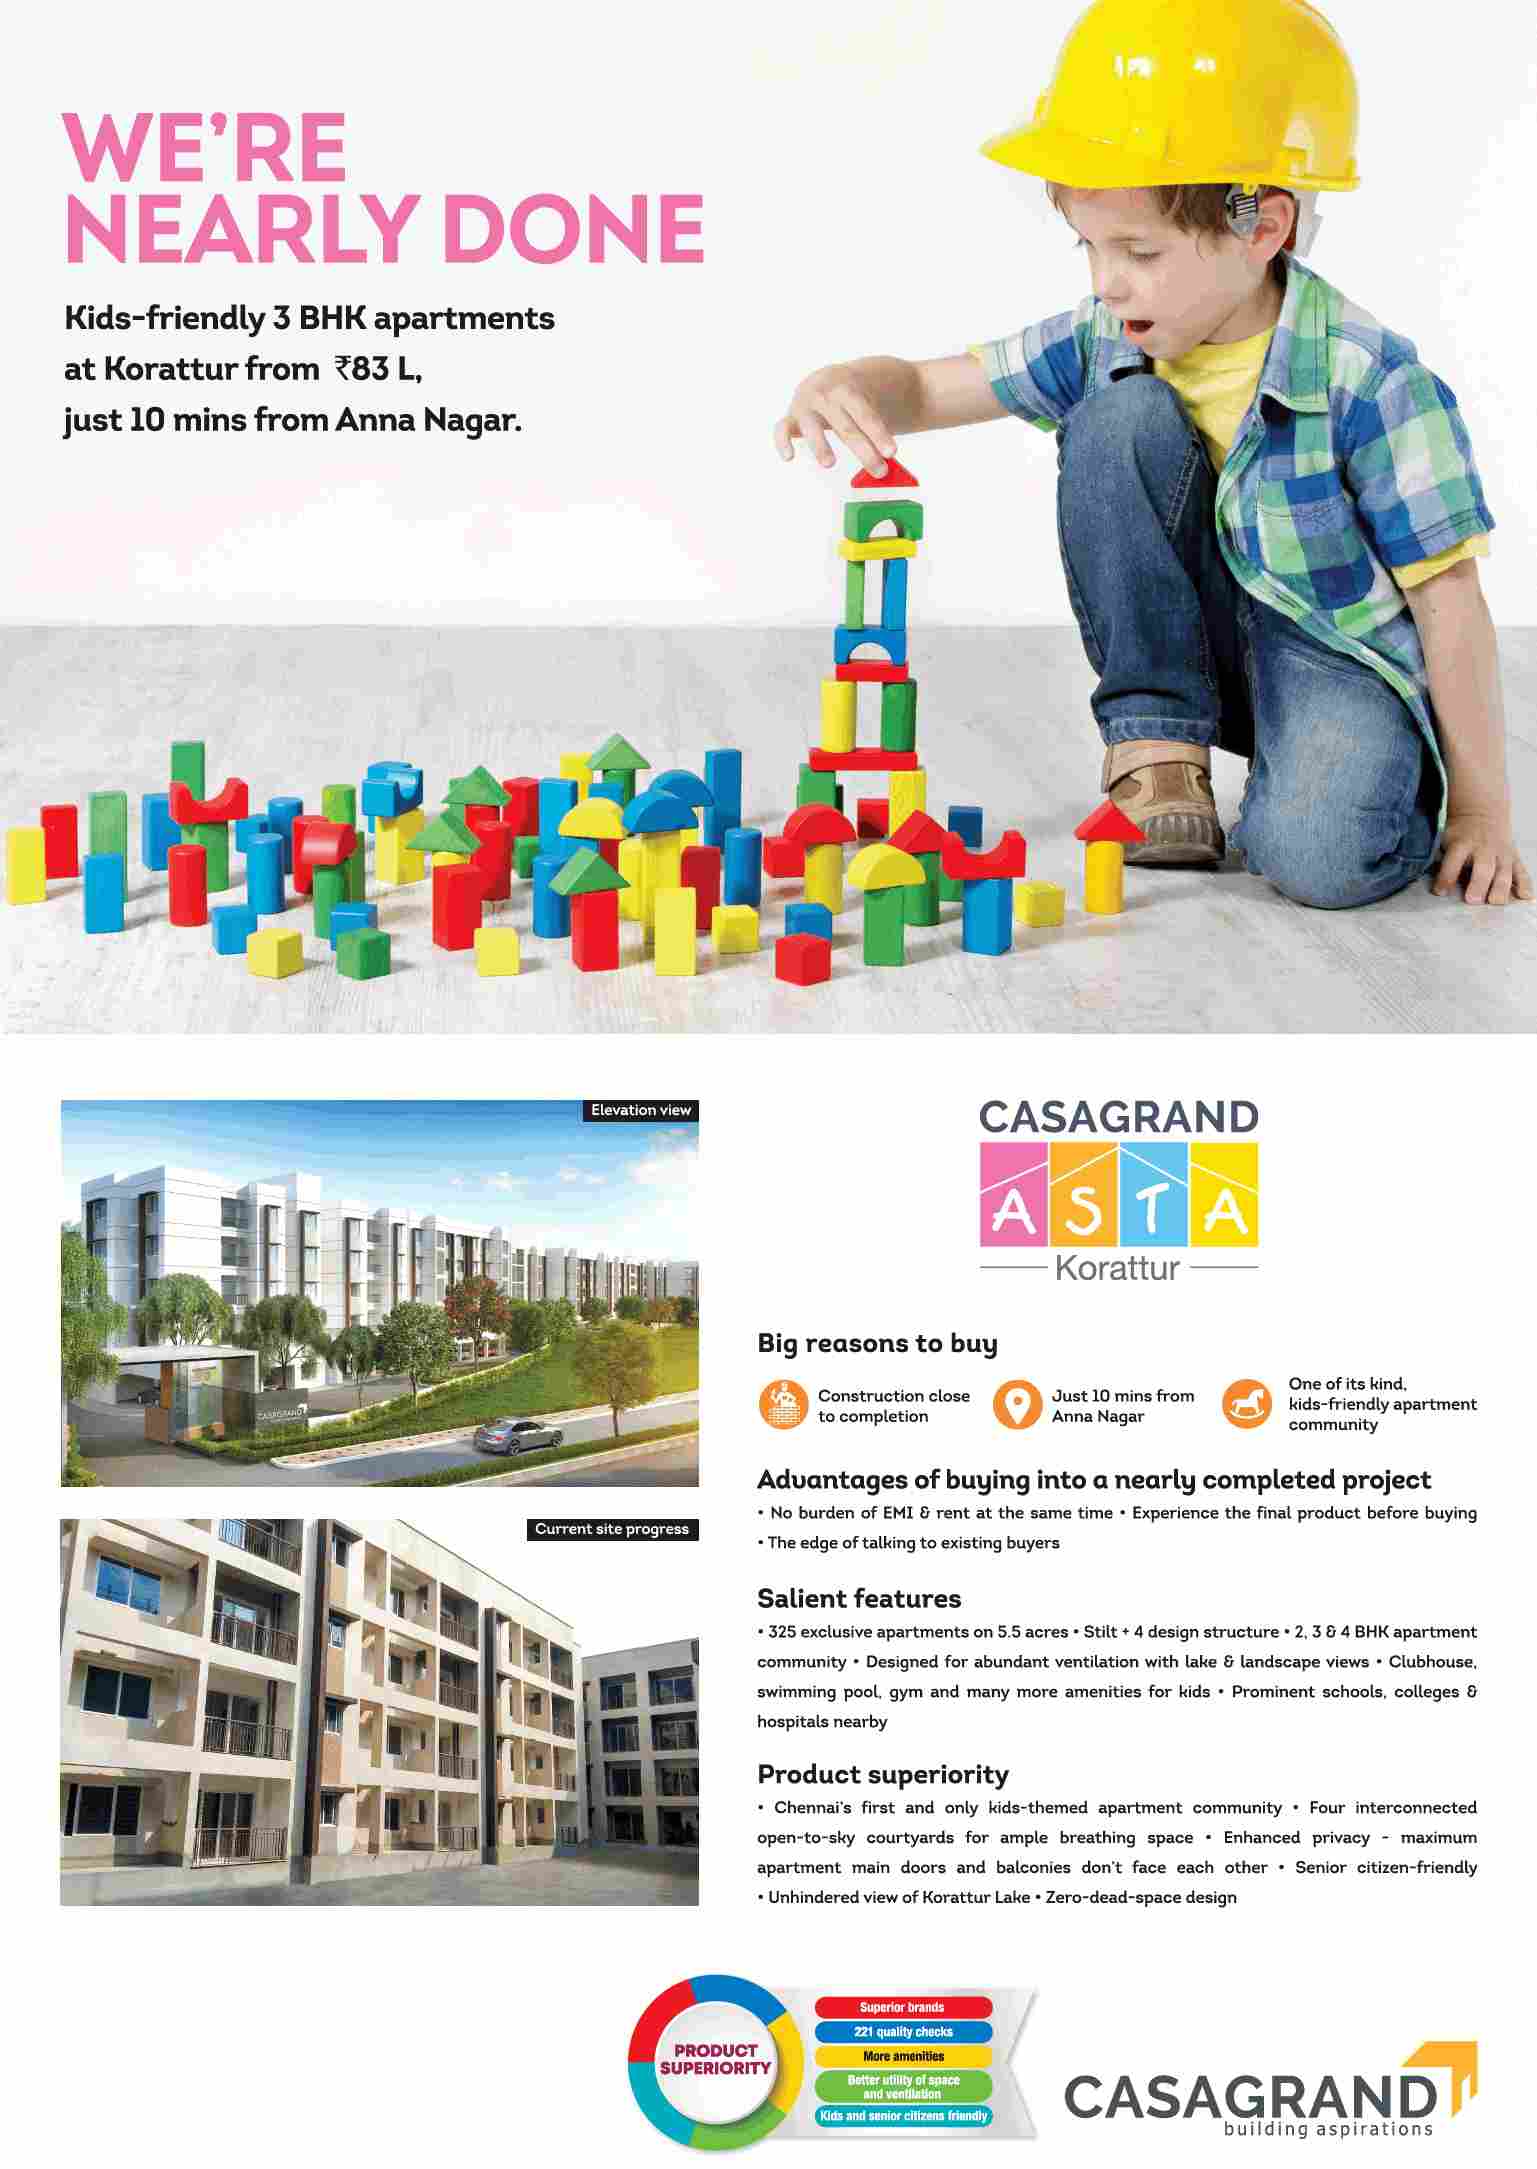 Construction close to completion at Casagrand Asta in Ambattur, Chennai Update